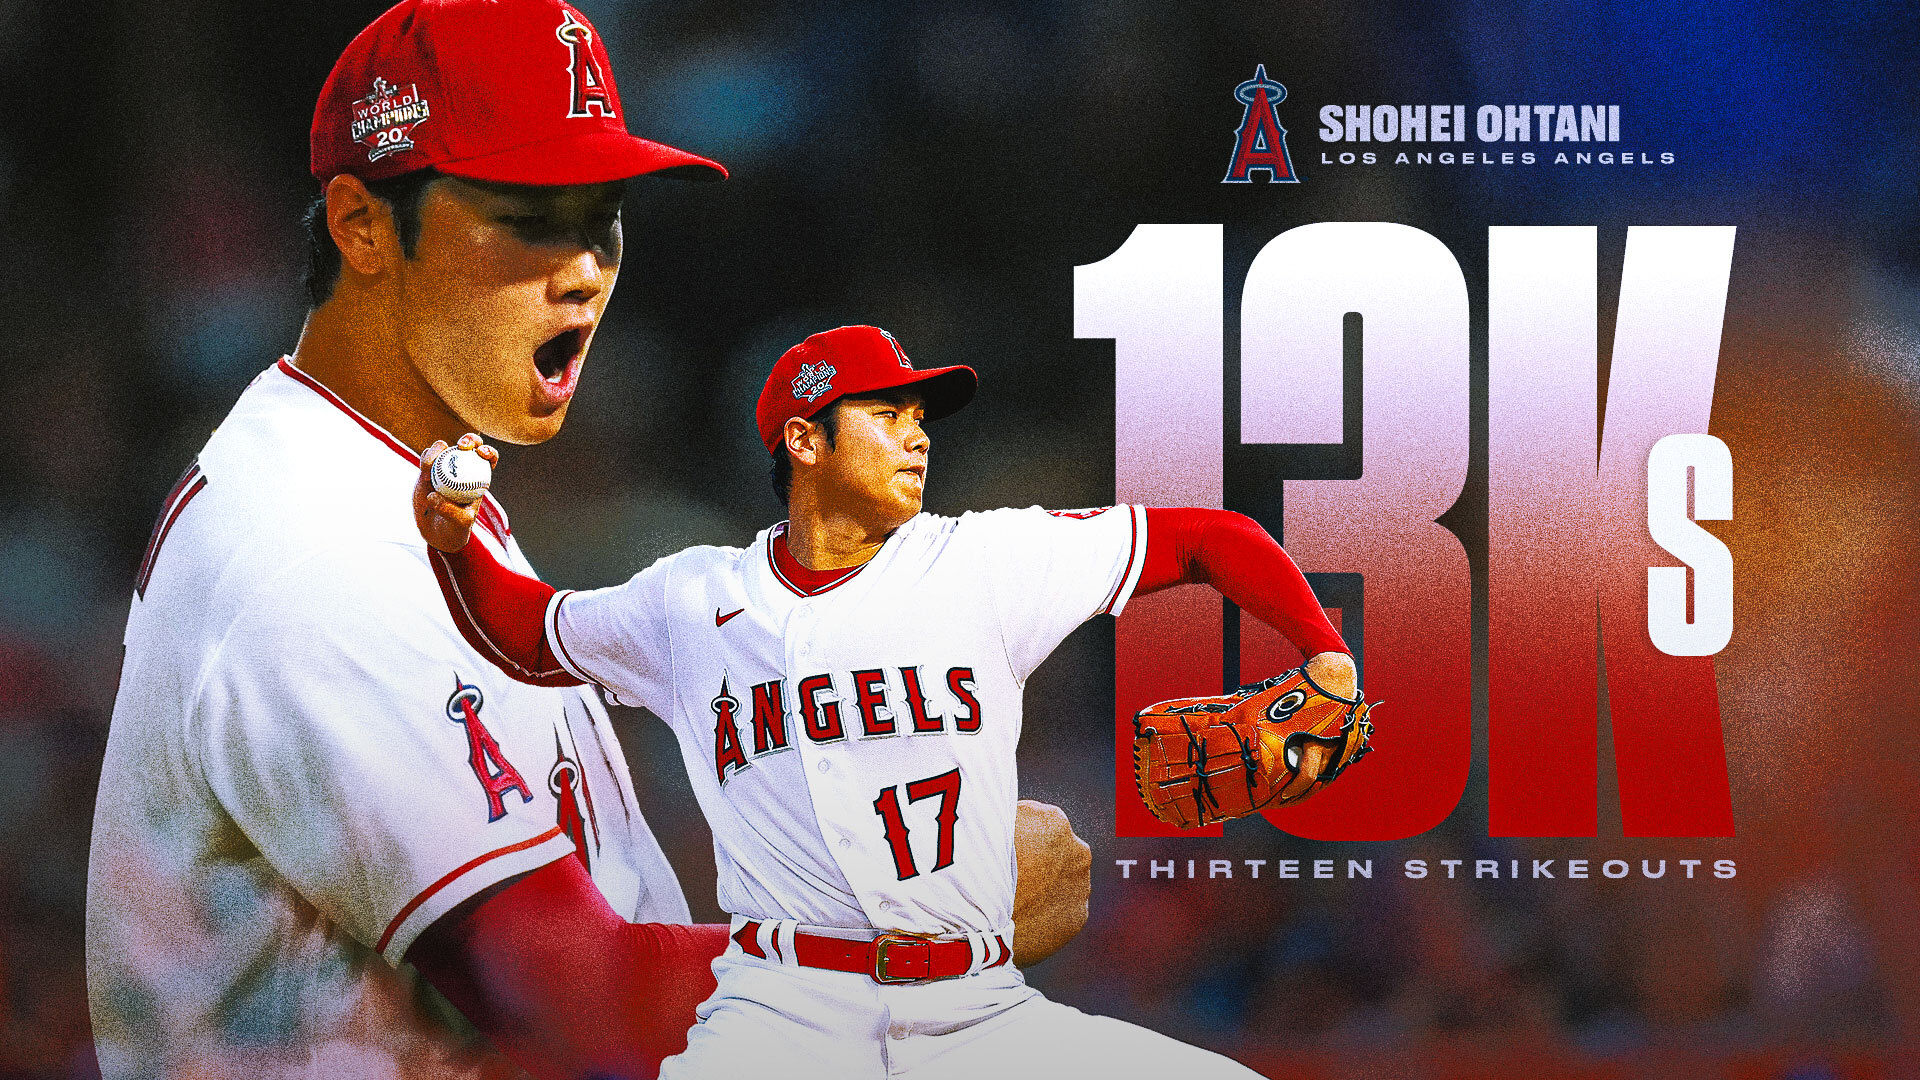 Shohei Ohtani dominates with 13 K's, continues historic week